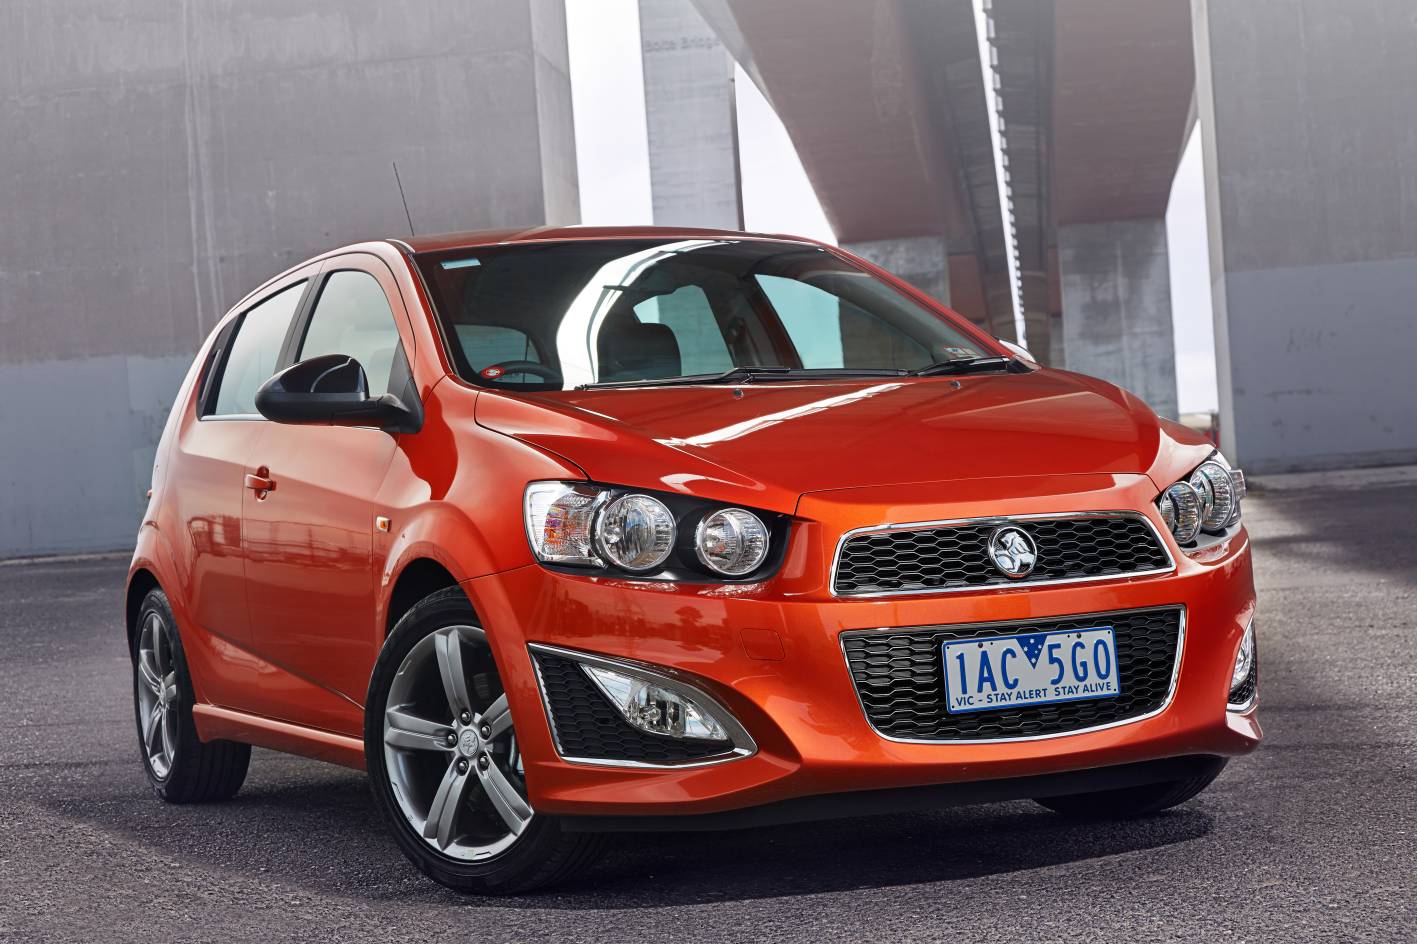 Holden Barina RS on sale from $20,990